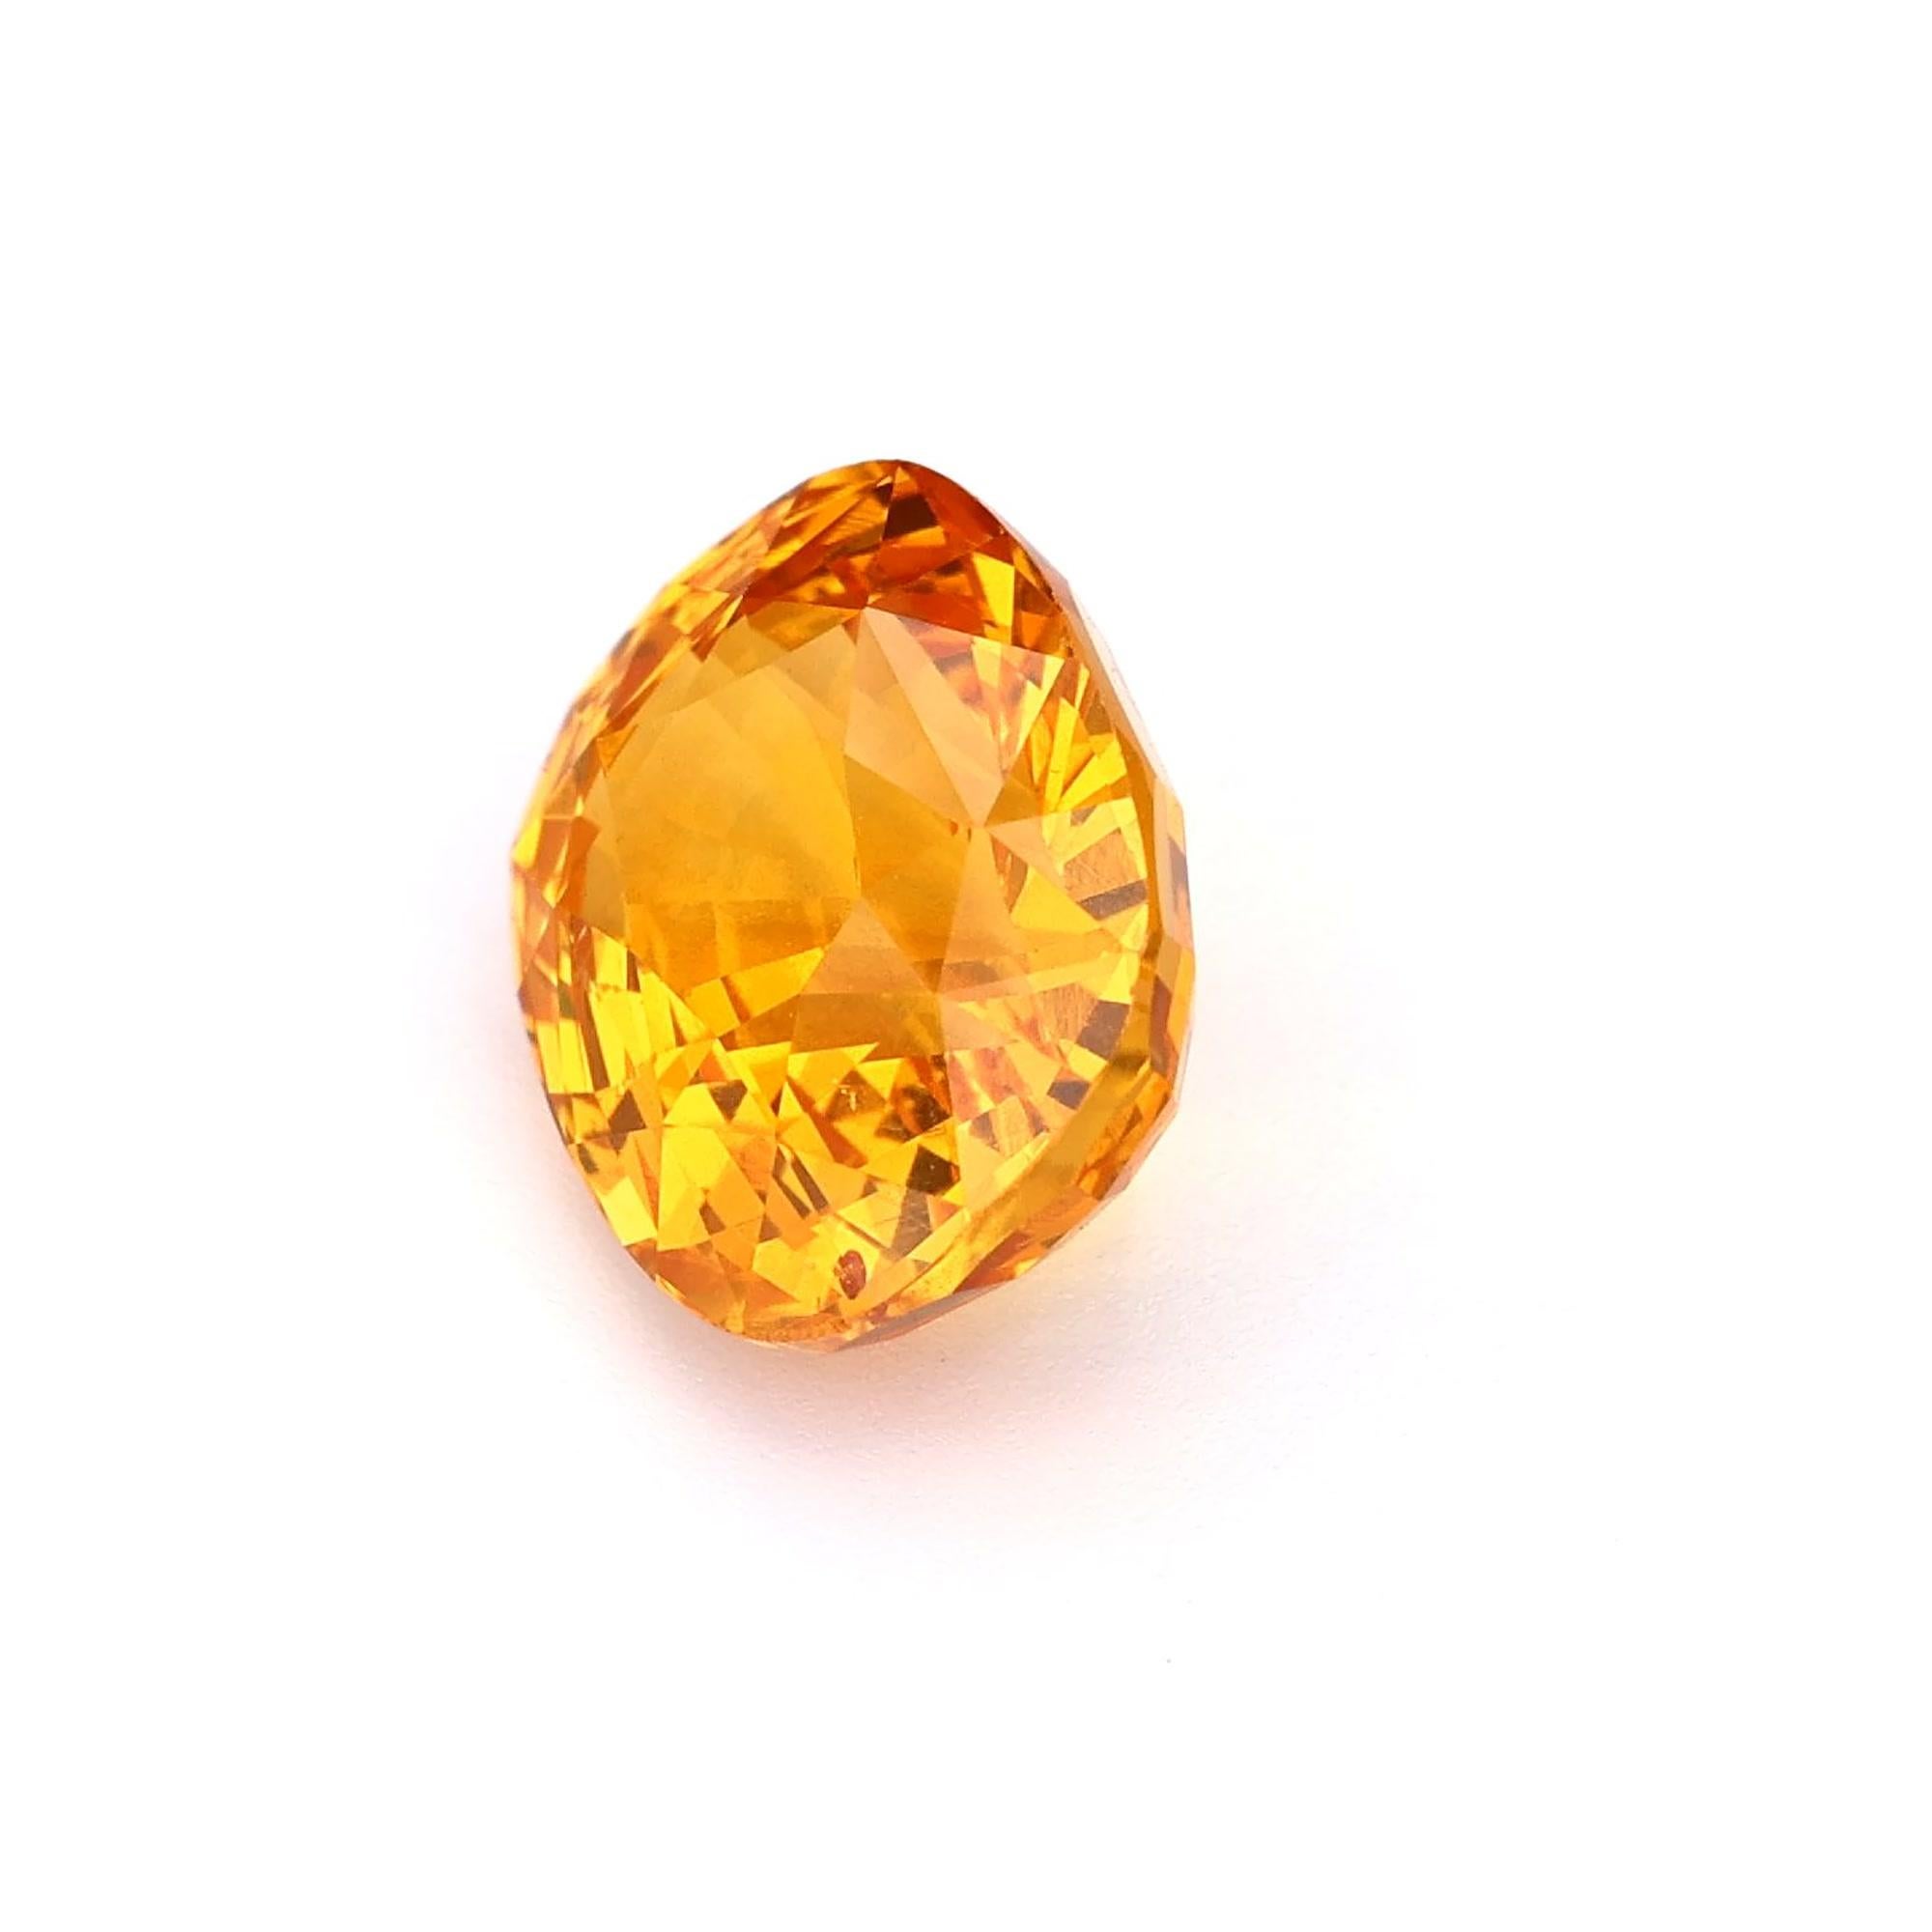 Pear Cut Certified 5.15 ct Natural Yellow Sapphire Ceylon Origin Ring Stone For Sale